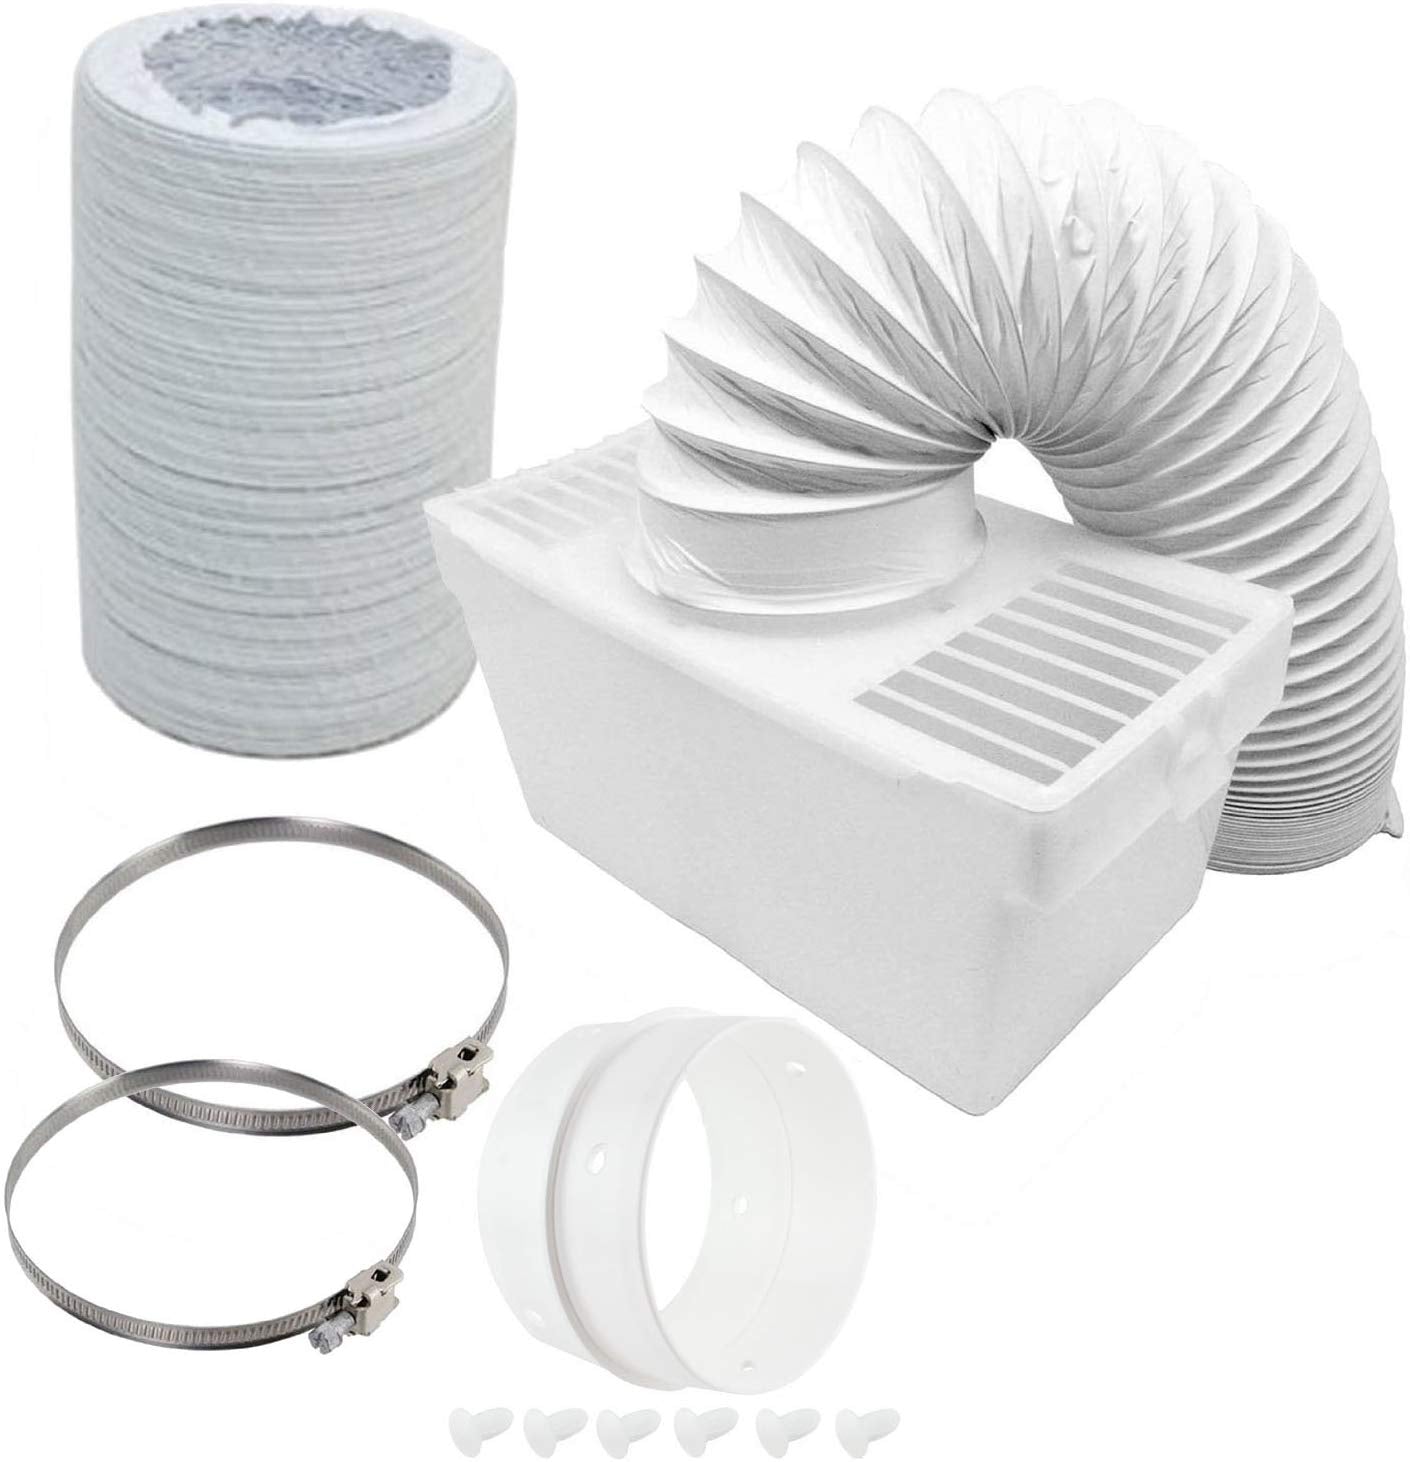 Condenser Box & Extra Long Hose Kit With Connection Ring for Lamona Tumble Dryer (4" / 100mm Diameter / 6M Hose)